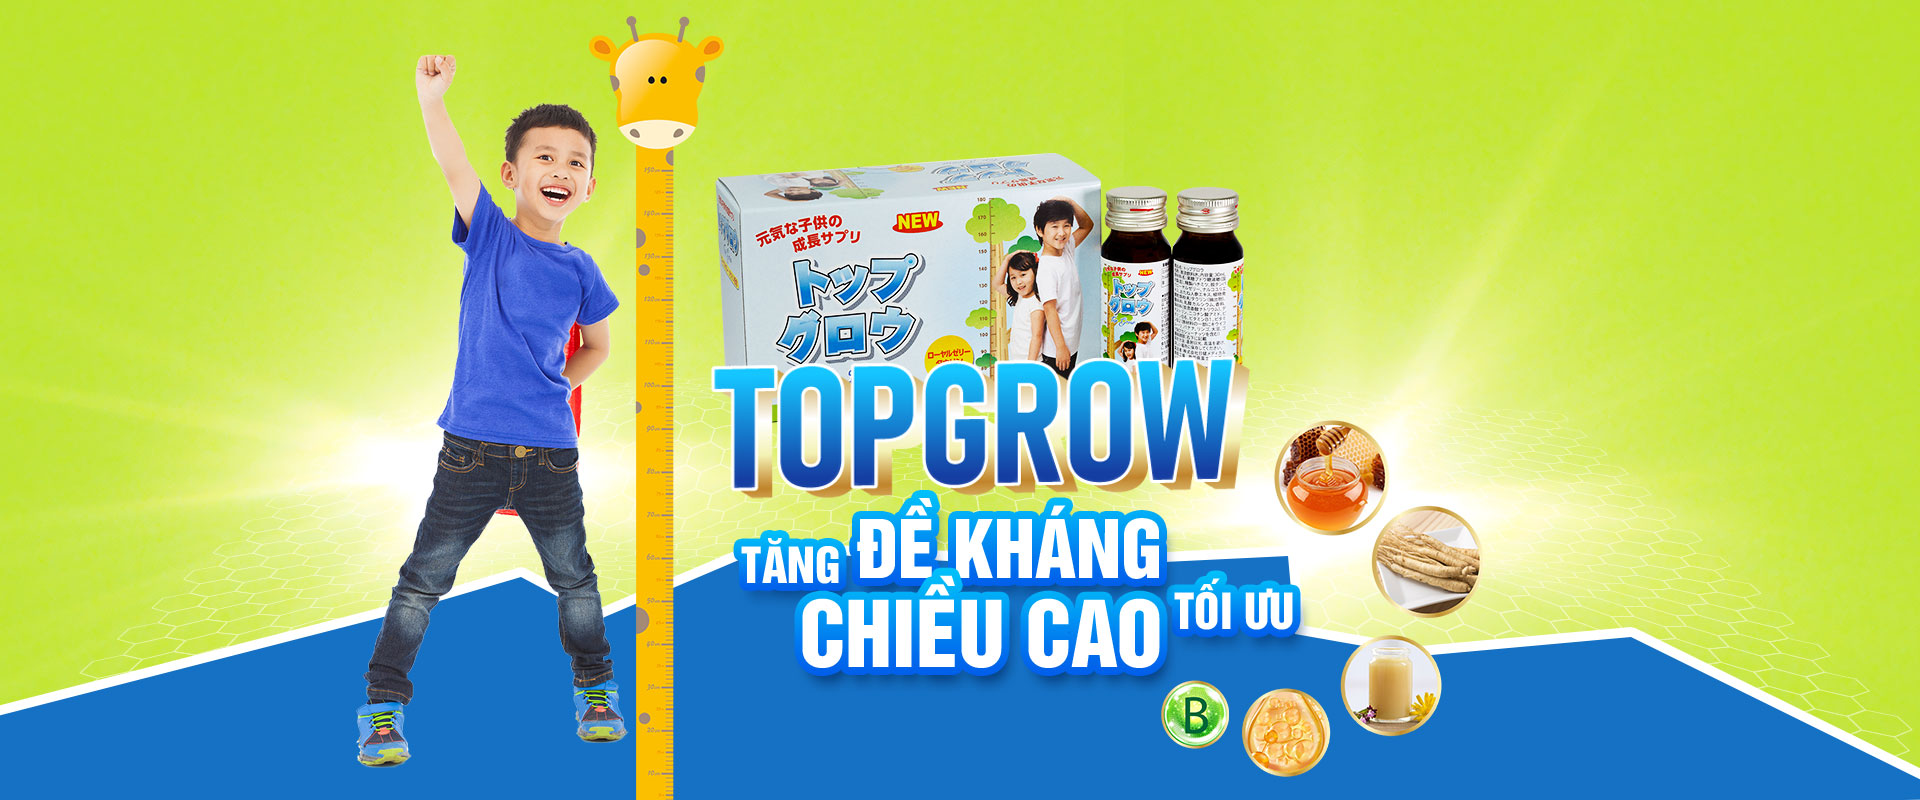 topgrow banner Trang chủ Go1care